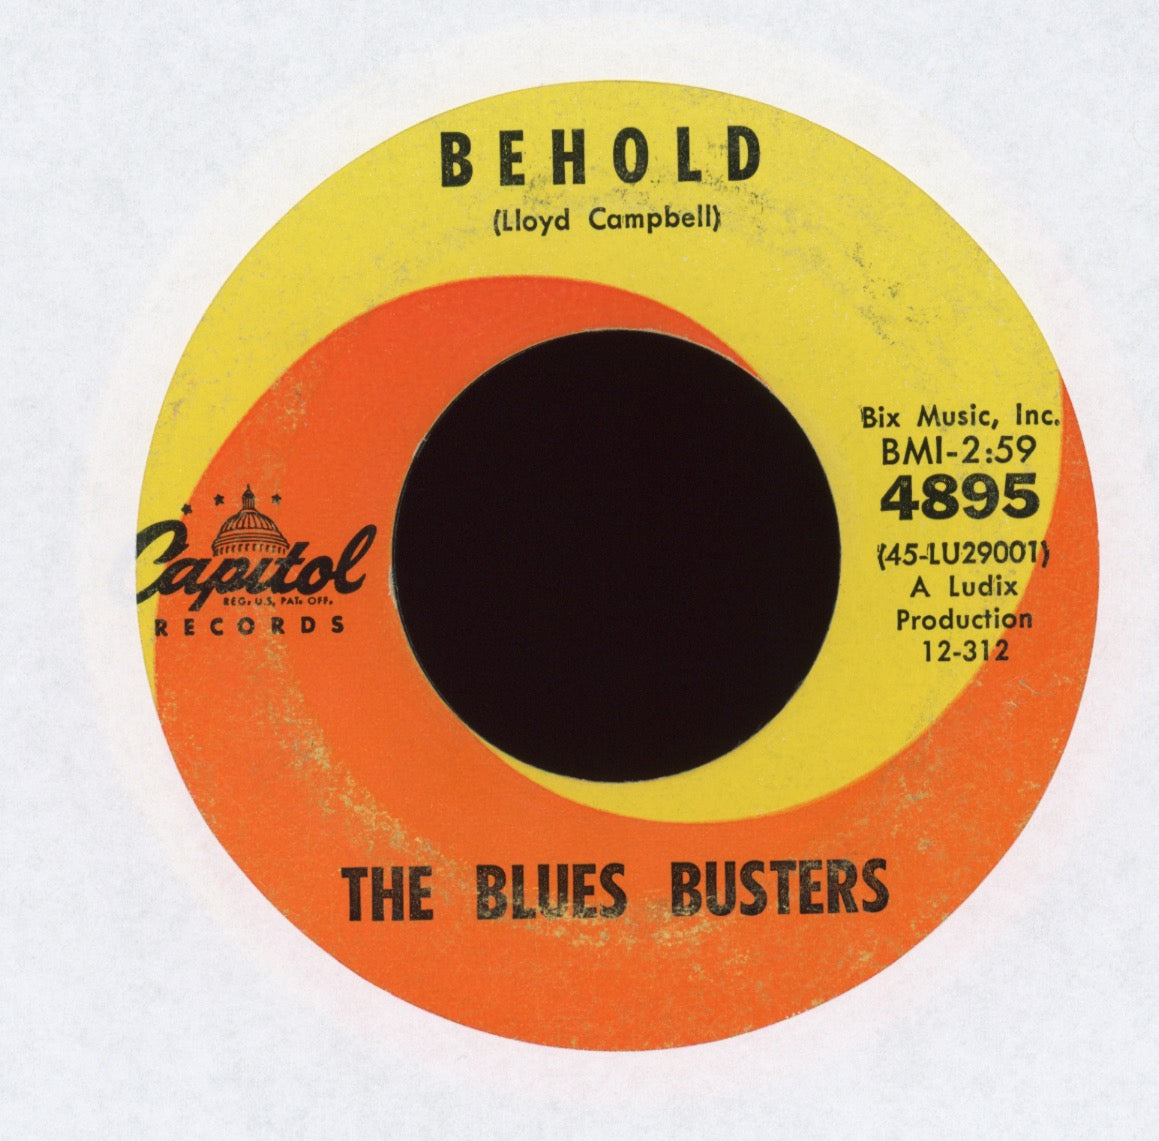 The Blues Busters - Tell My Why on Capitol